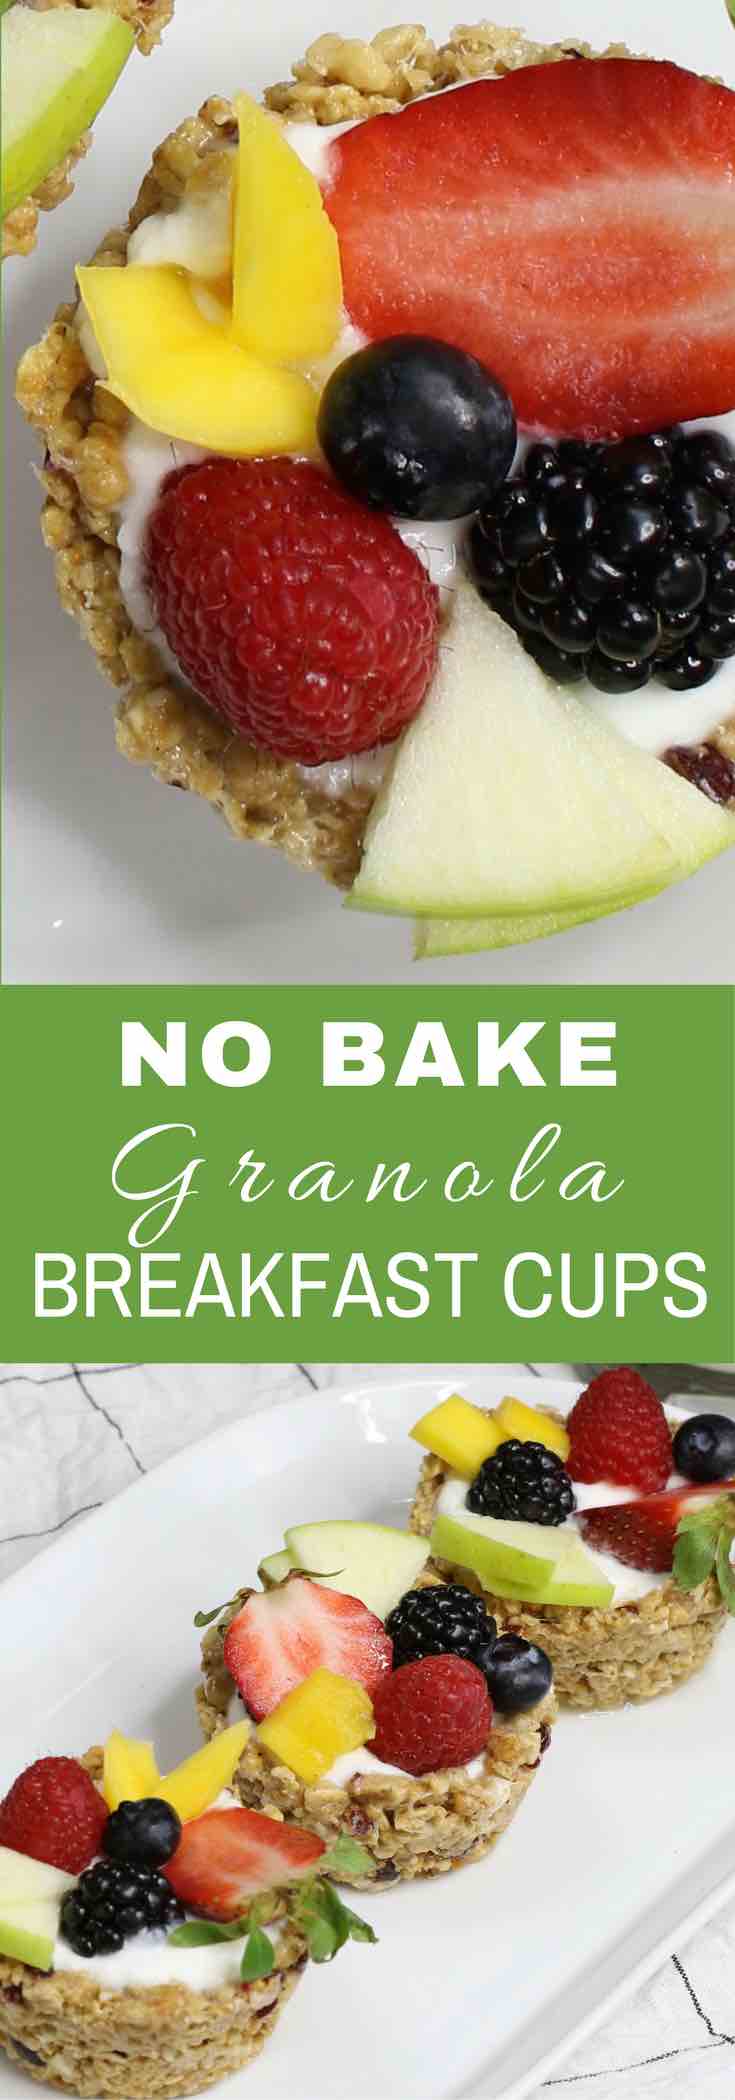 Granola Breakfast Cups with Yogurt and Fruits – the easiest wholesome and beautiful breakfast granola cups made with only 3 ingredients: granola, butter and mini marshmallows. You can customize your favorite fillings and toppings such as yogurt and fruits in the crunchy granola crust! No bake. Quick and easy video recipe. | Tipbuzz.com 